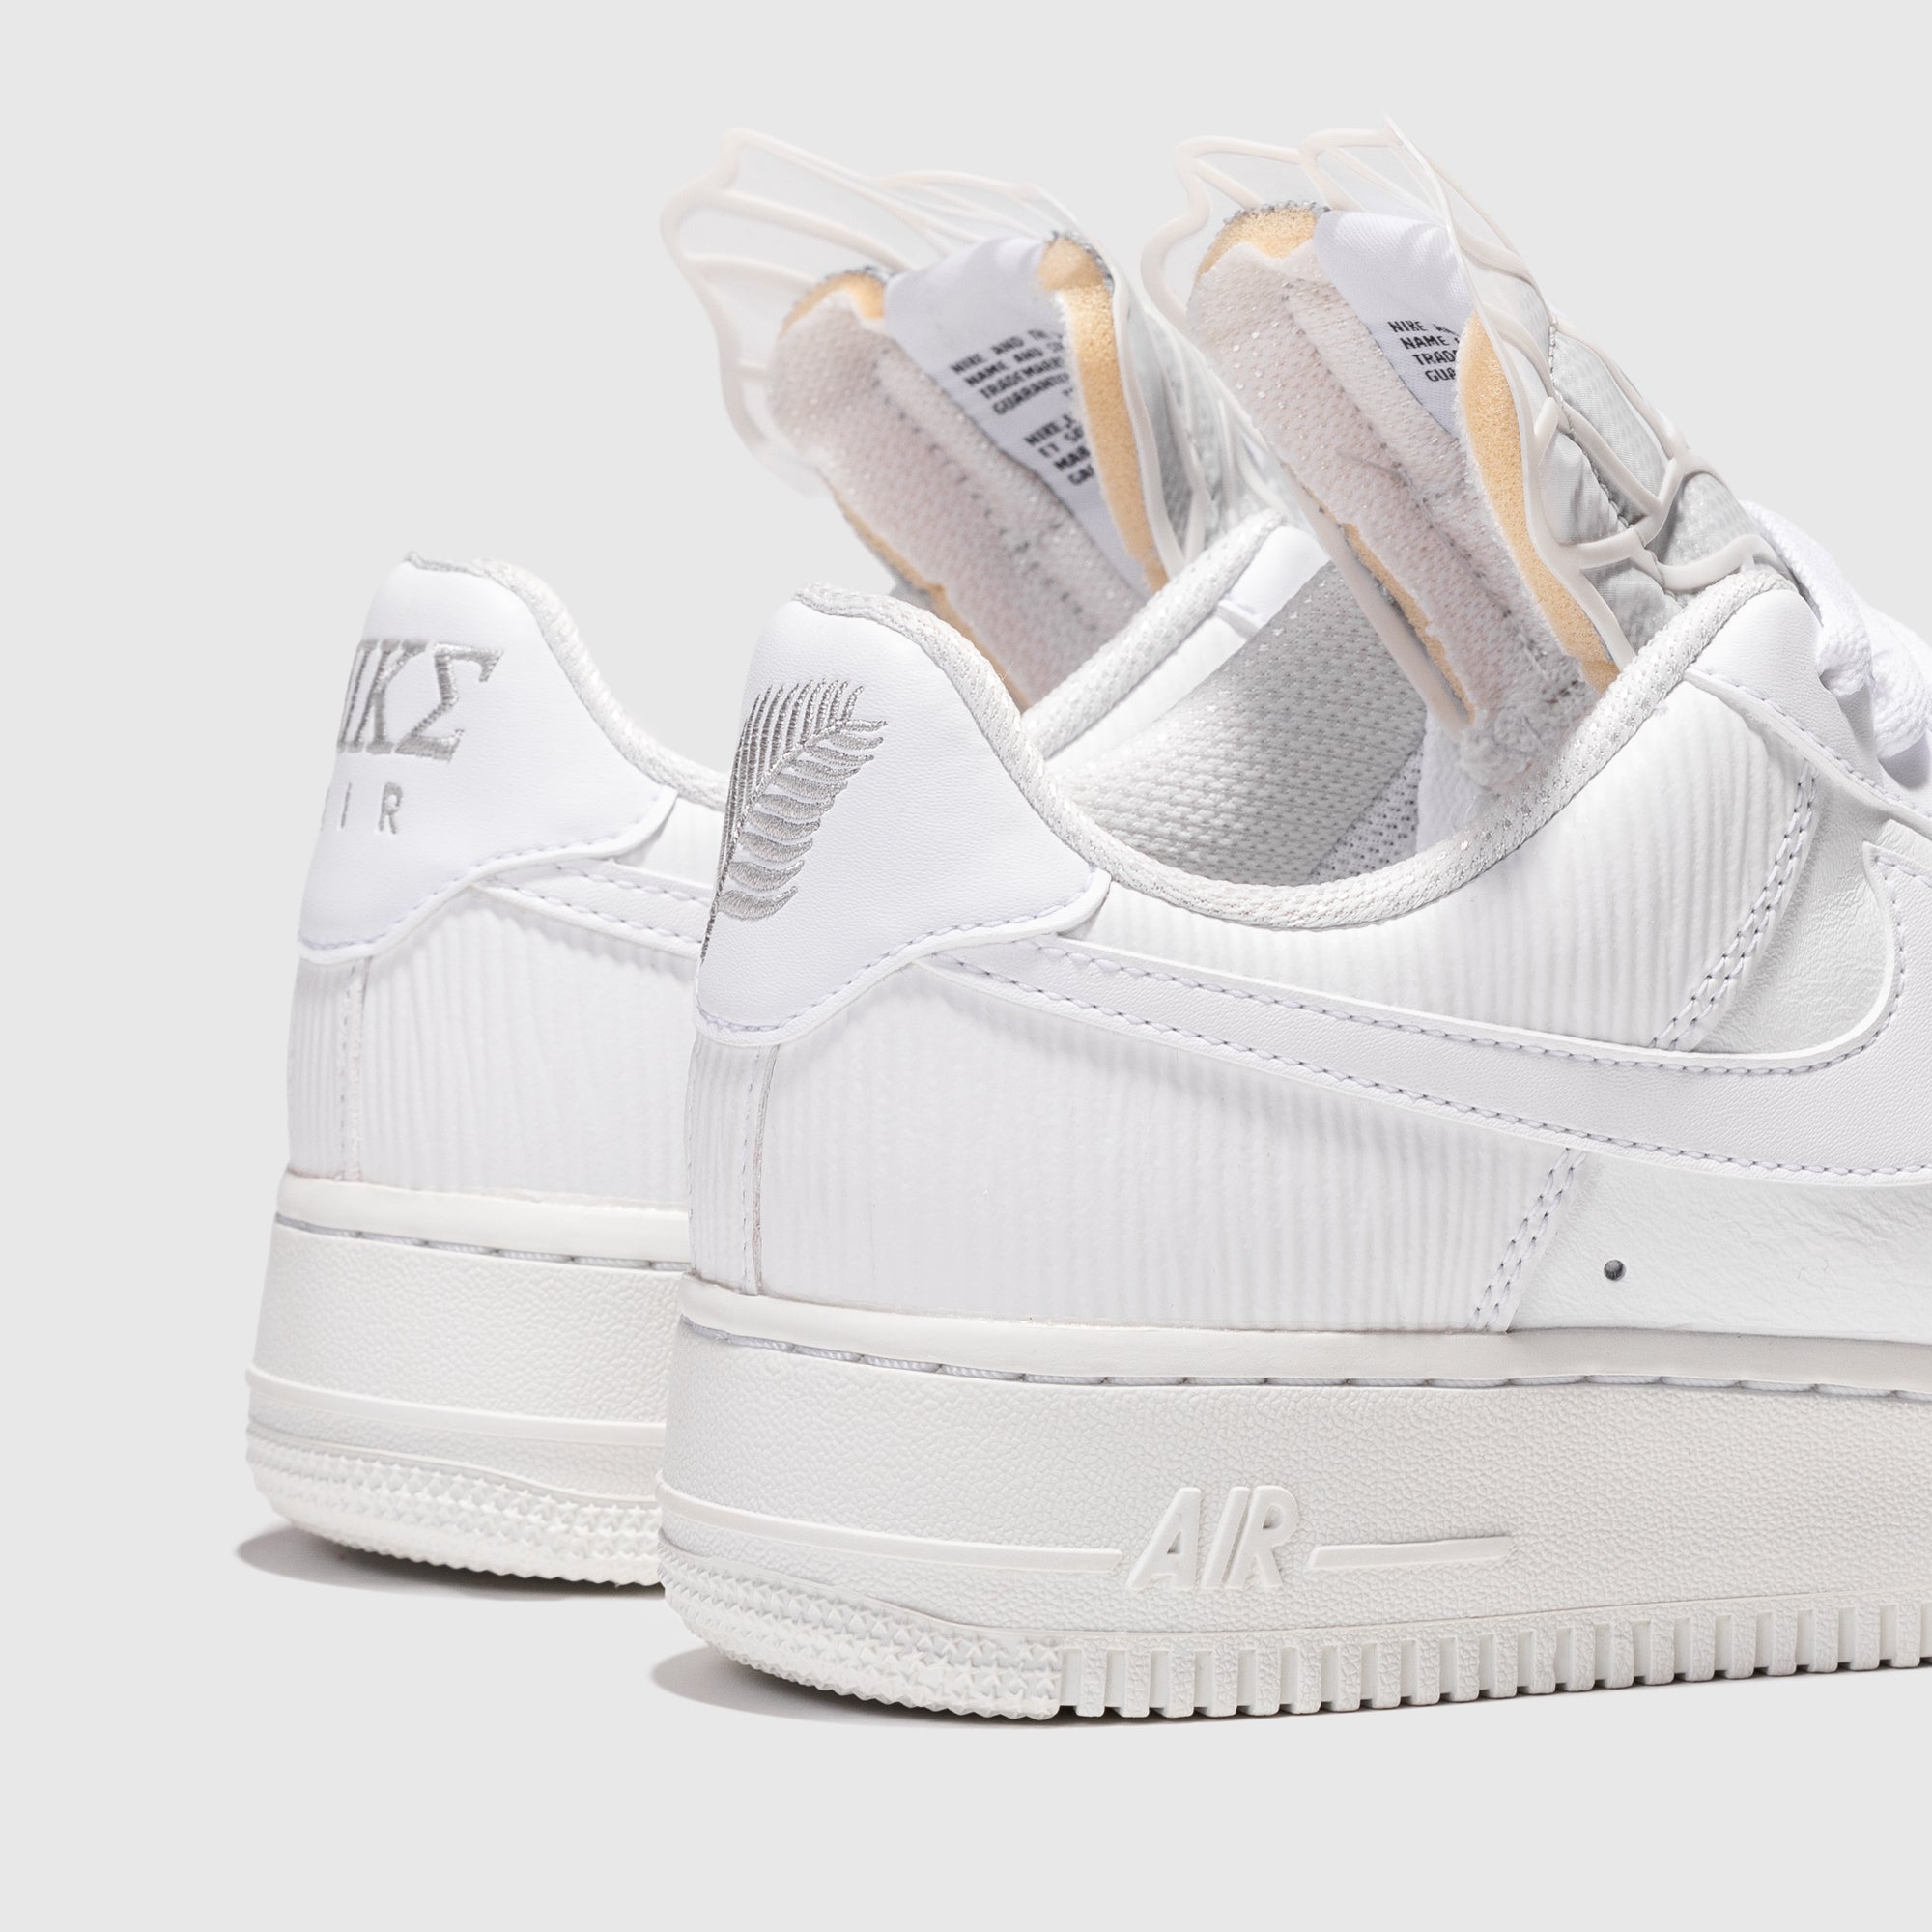 WMNS AIR FORCE 1 LOW "GODDESS OF VICTORY"